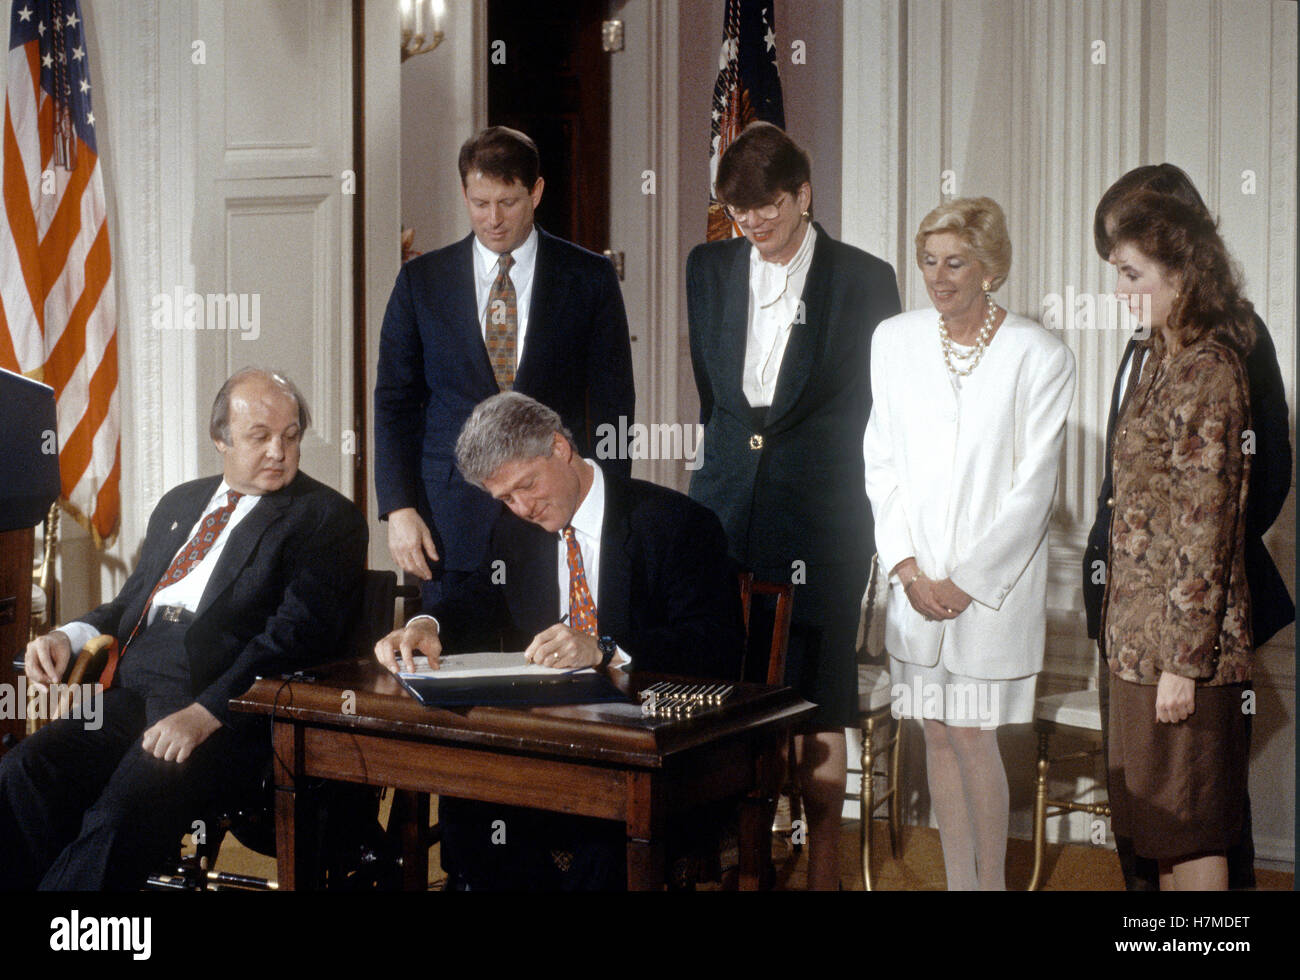 United States President Bill Clinton signs the 'Brady Bill' during a ceremony in the East Room of the White House in Washington, DC on November 30, 1993. From left to right: Former White House press secretary James S. Brady; U.S. Vice President Al Gore; President Clinton; U.S. Attorney General Janet Reno; Sarah Brady, wife of James Brady; and Melanie Musick, whose husband was killed by a hand gun. Brady passed away on Monday, August 4, 2014. Credit: Ron Sachs/CNP /MediaPunch Stock Photo